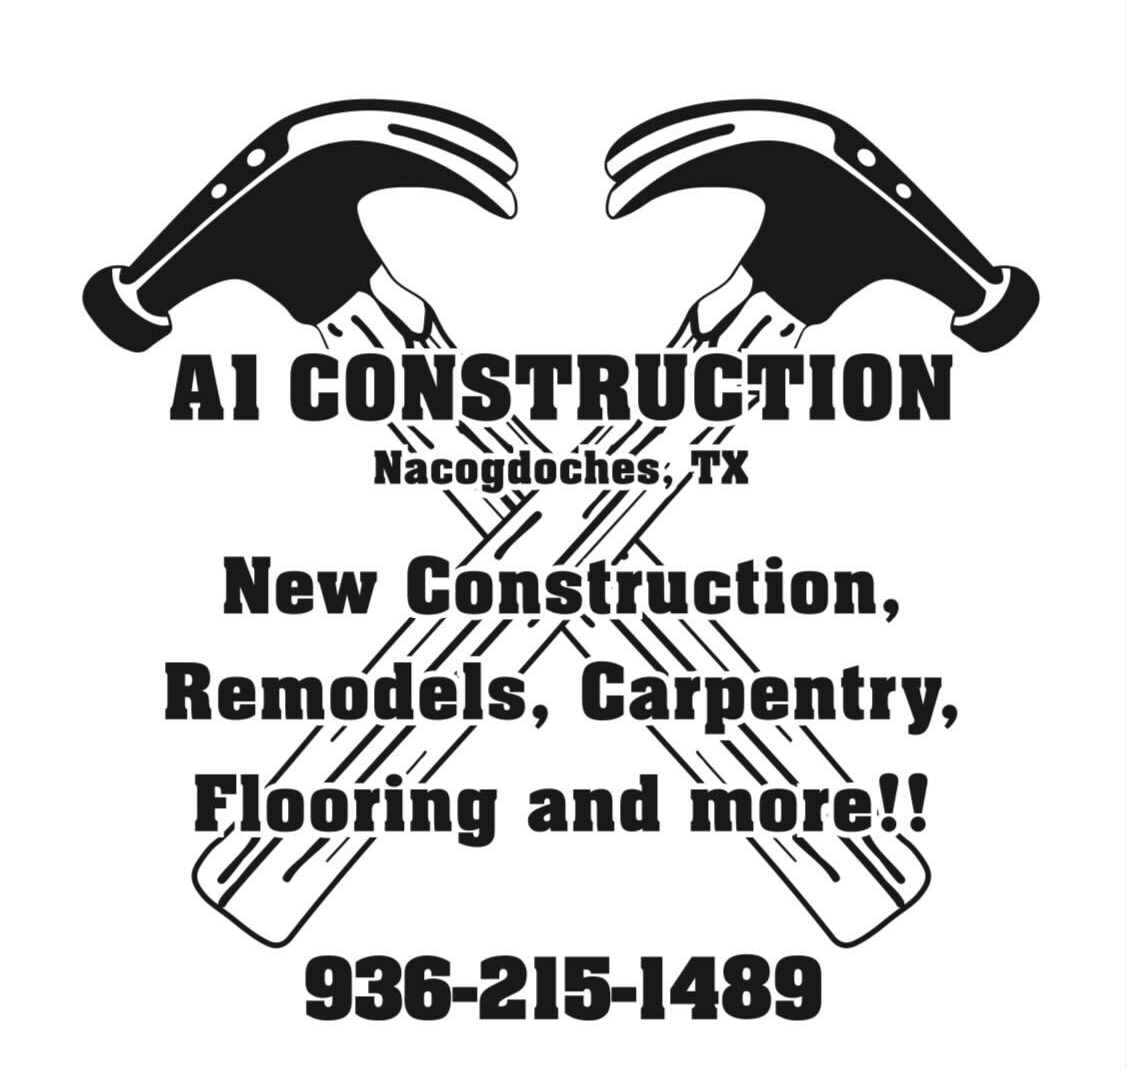 A-1 Construction & Remodeling Services, LLC